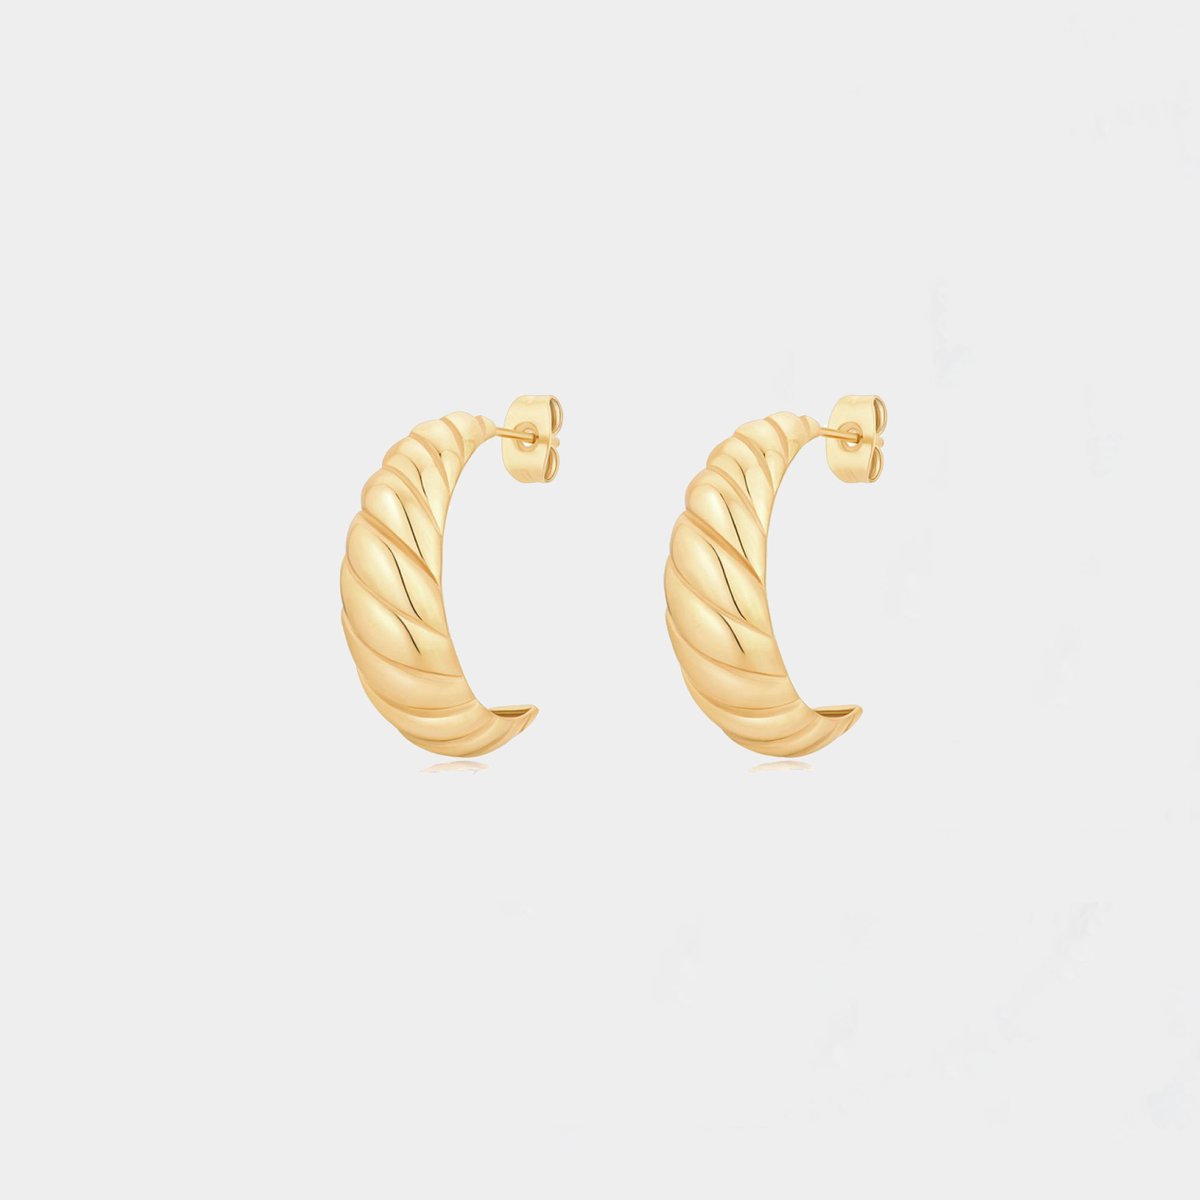 curate, siizu, sustainable and ethically made fashion jewelry, womens twisted gold hoop earrings, womens hoop earrings, gold hoop earrings, medium sized hoop earrings, fashion jewelry